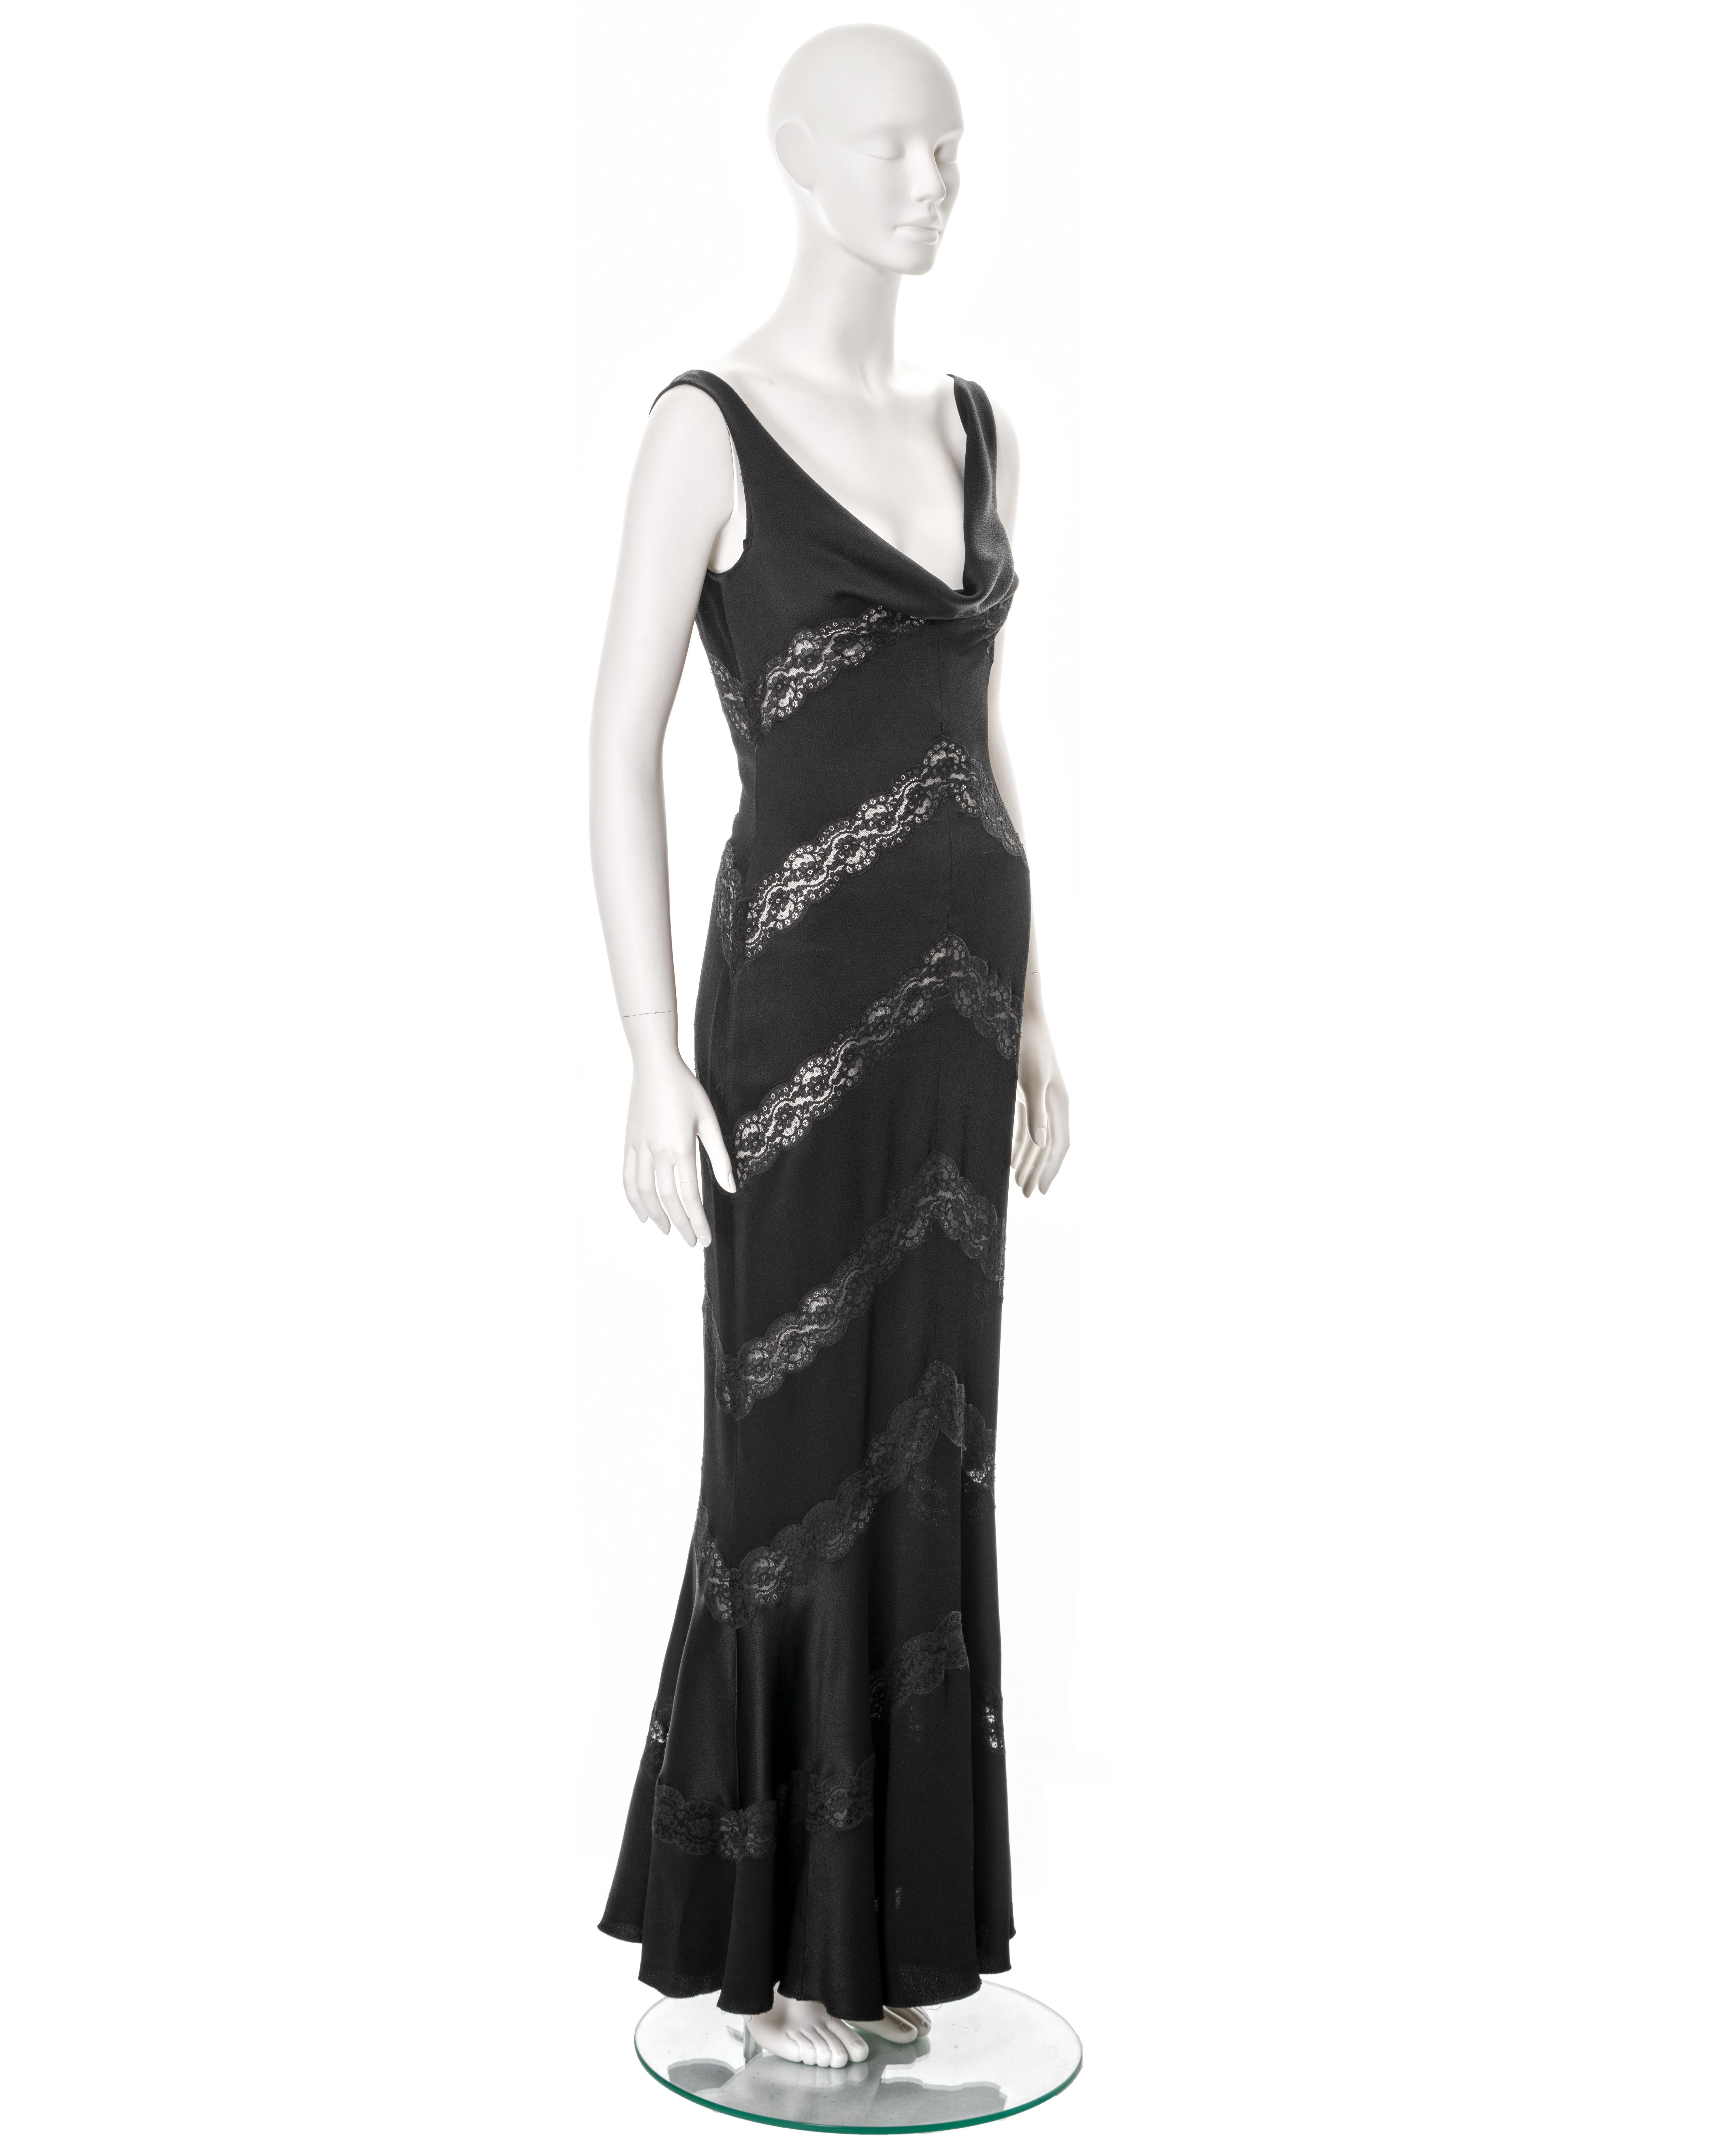 Women's Christian Dior by John Galliano black evening dress with lace inserts, ss 1999 For Sale